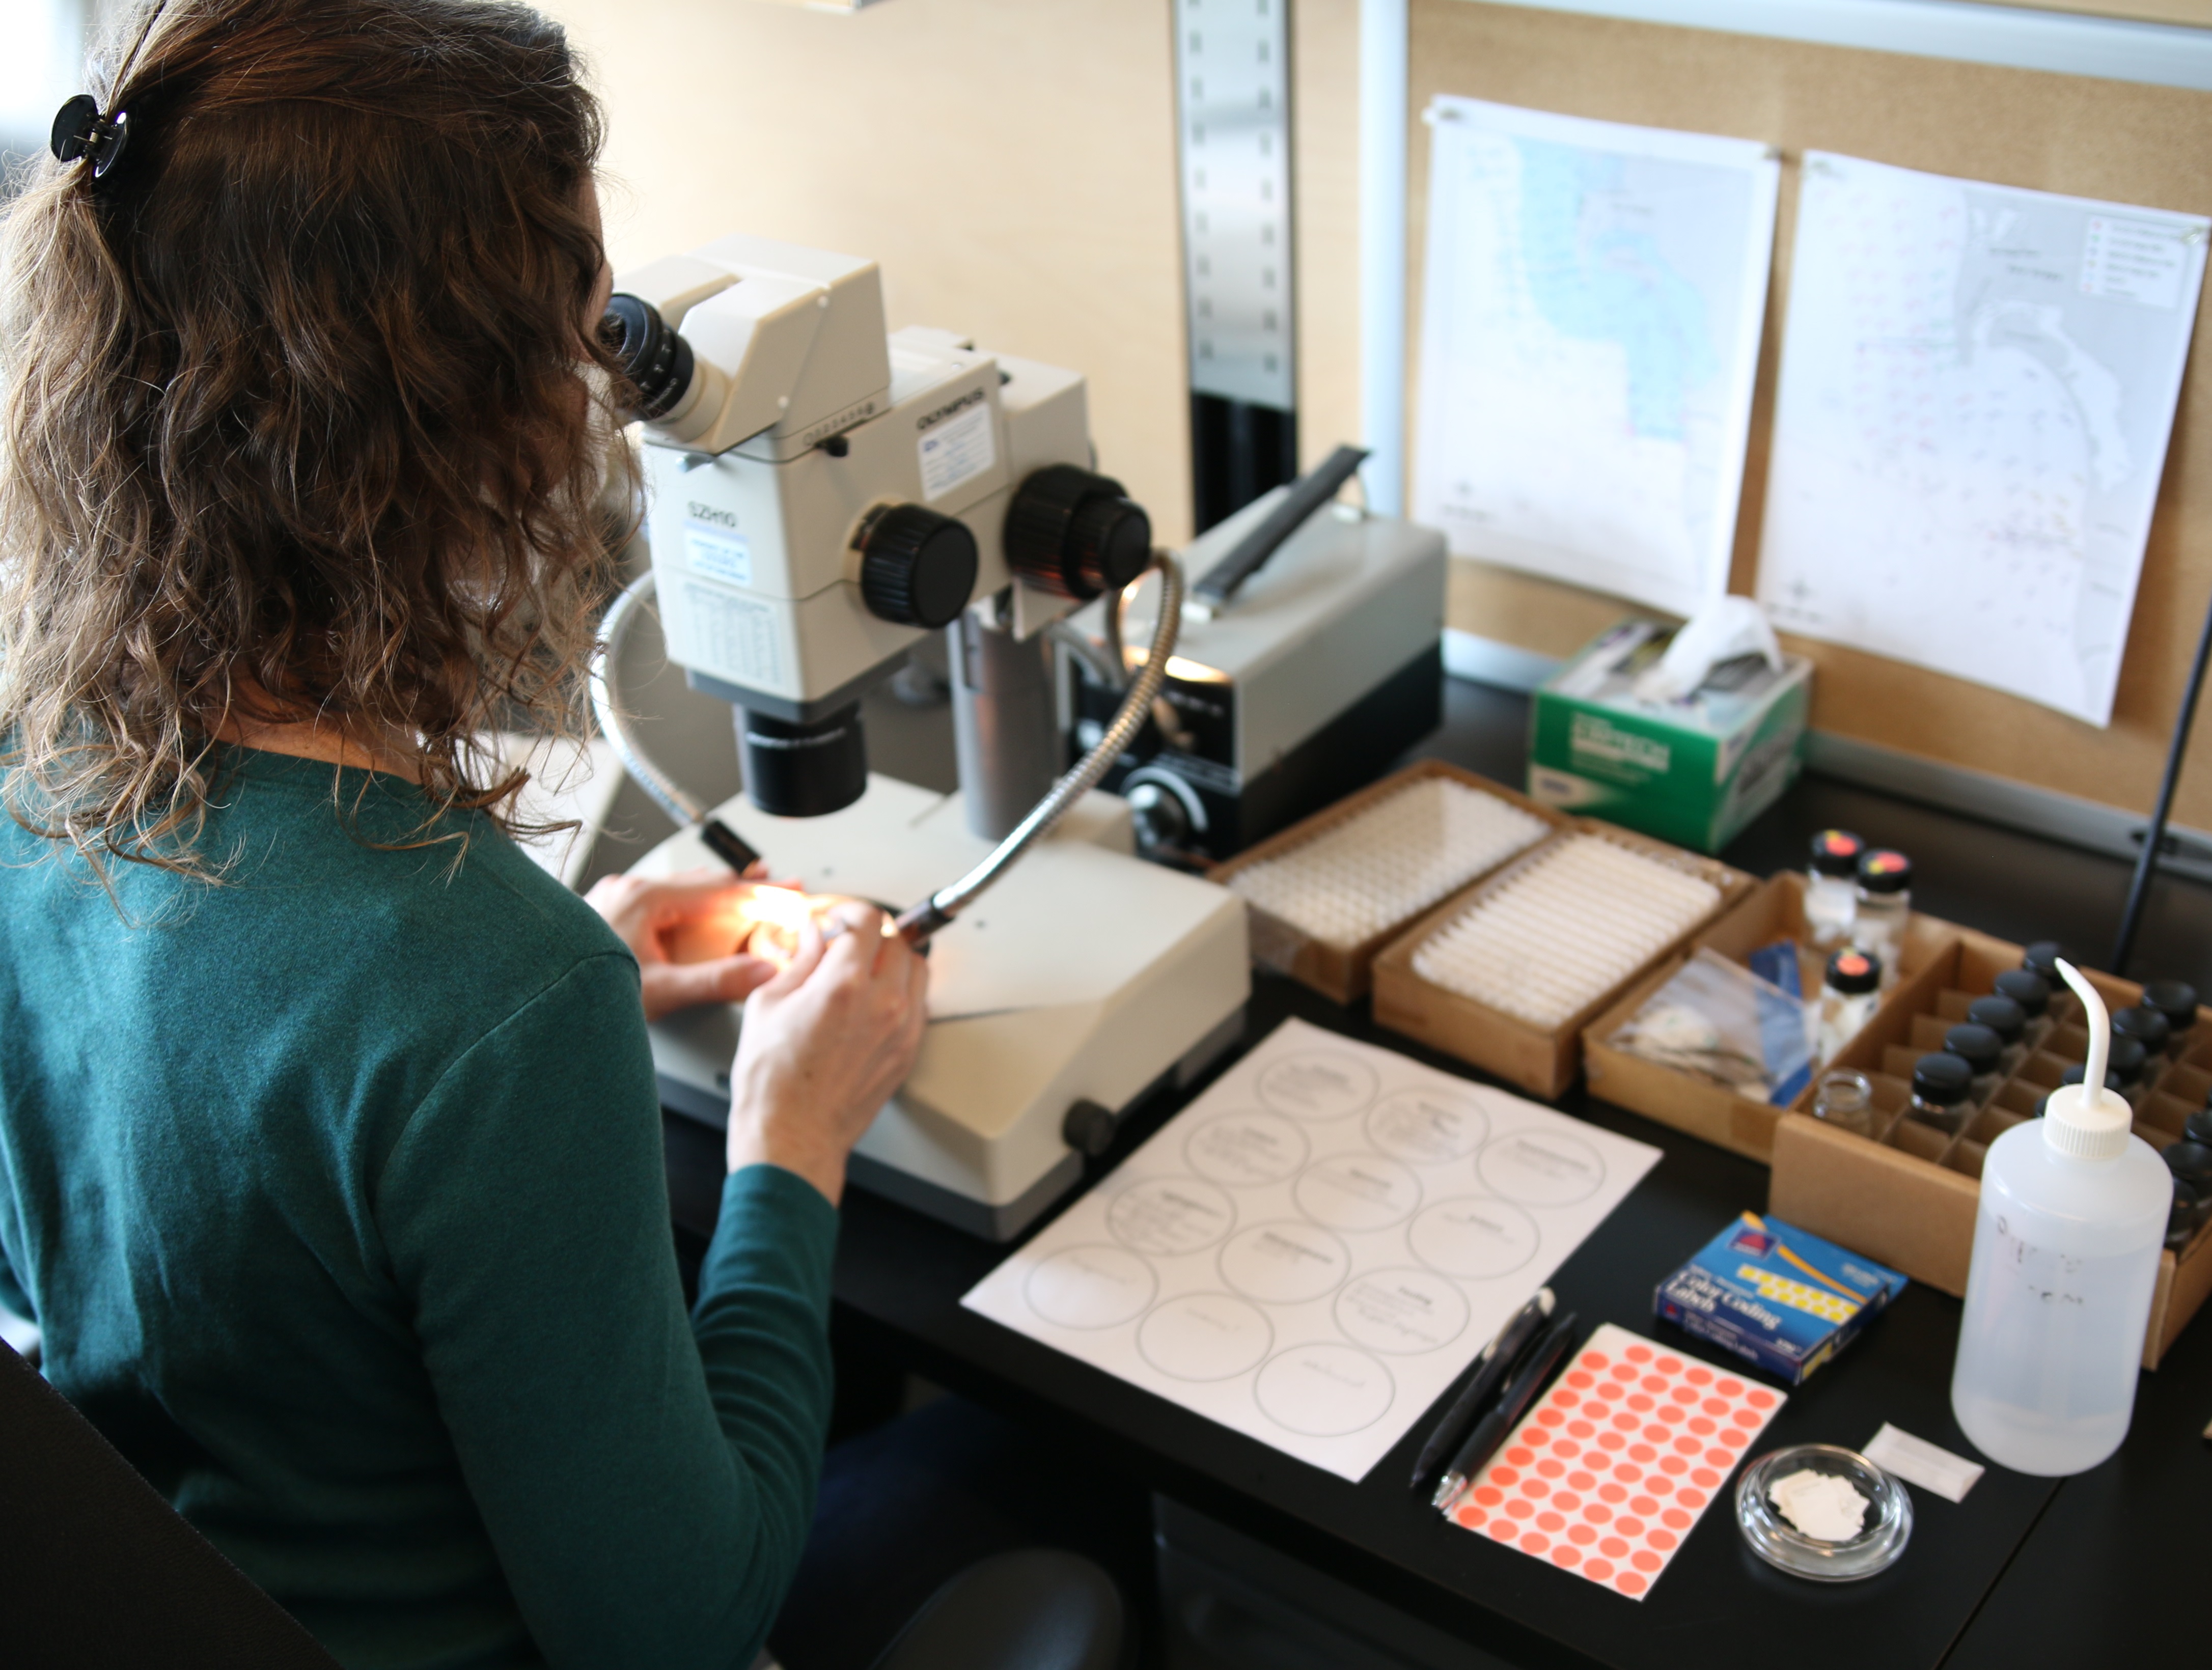 A marine biologist examines a benthic infauna sample to identify and count invertebrates such as worms, urchins, and sea stars.